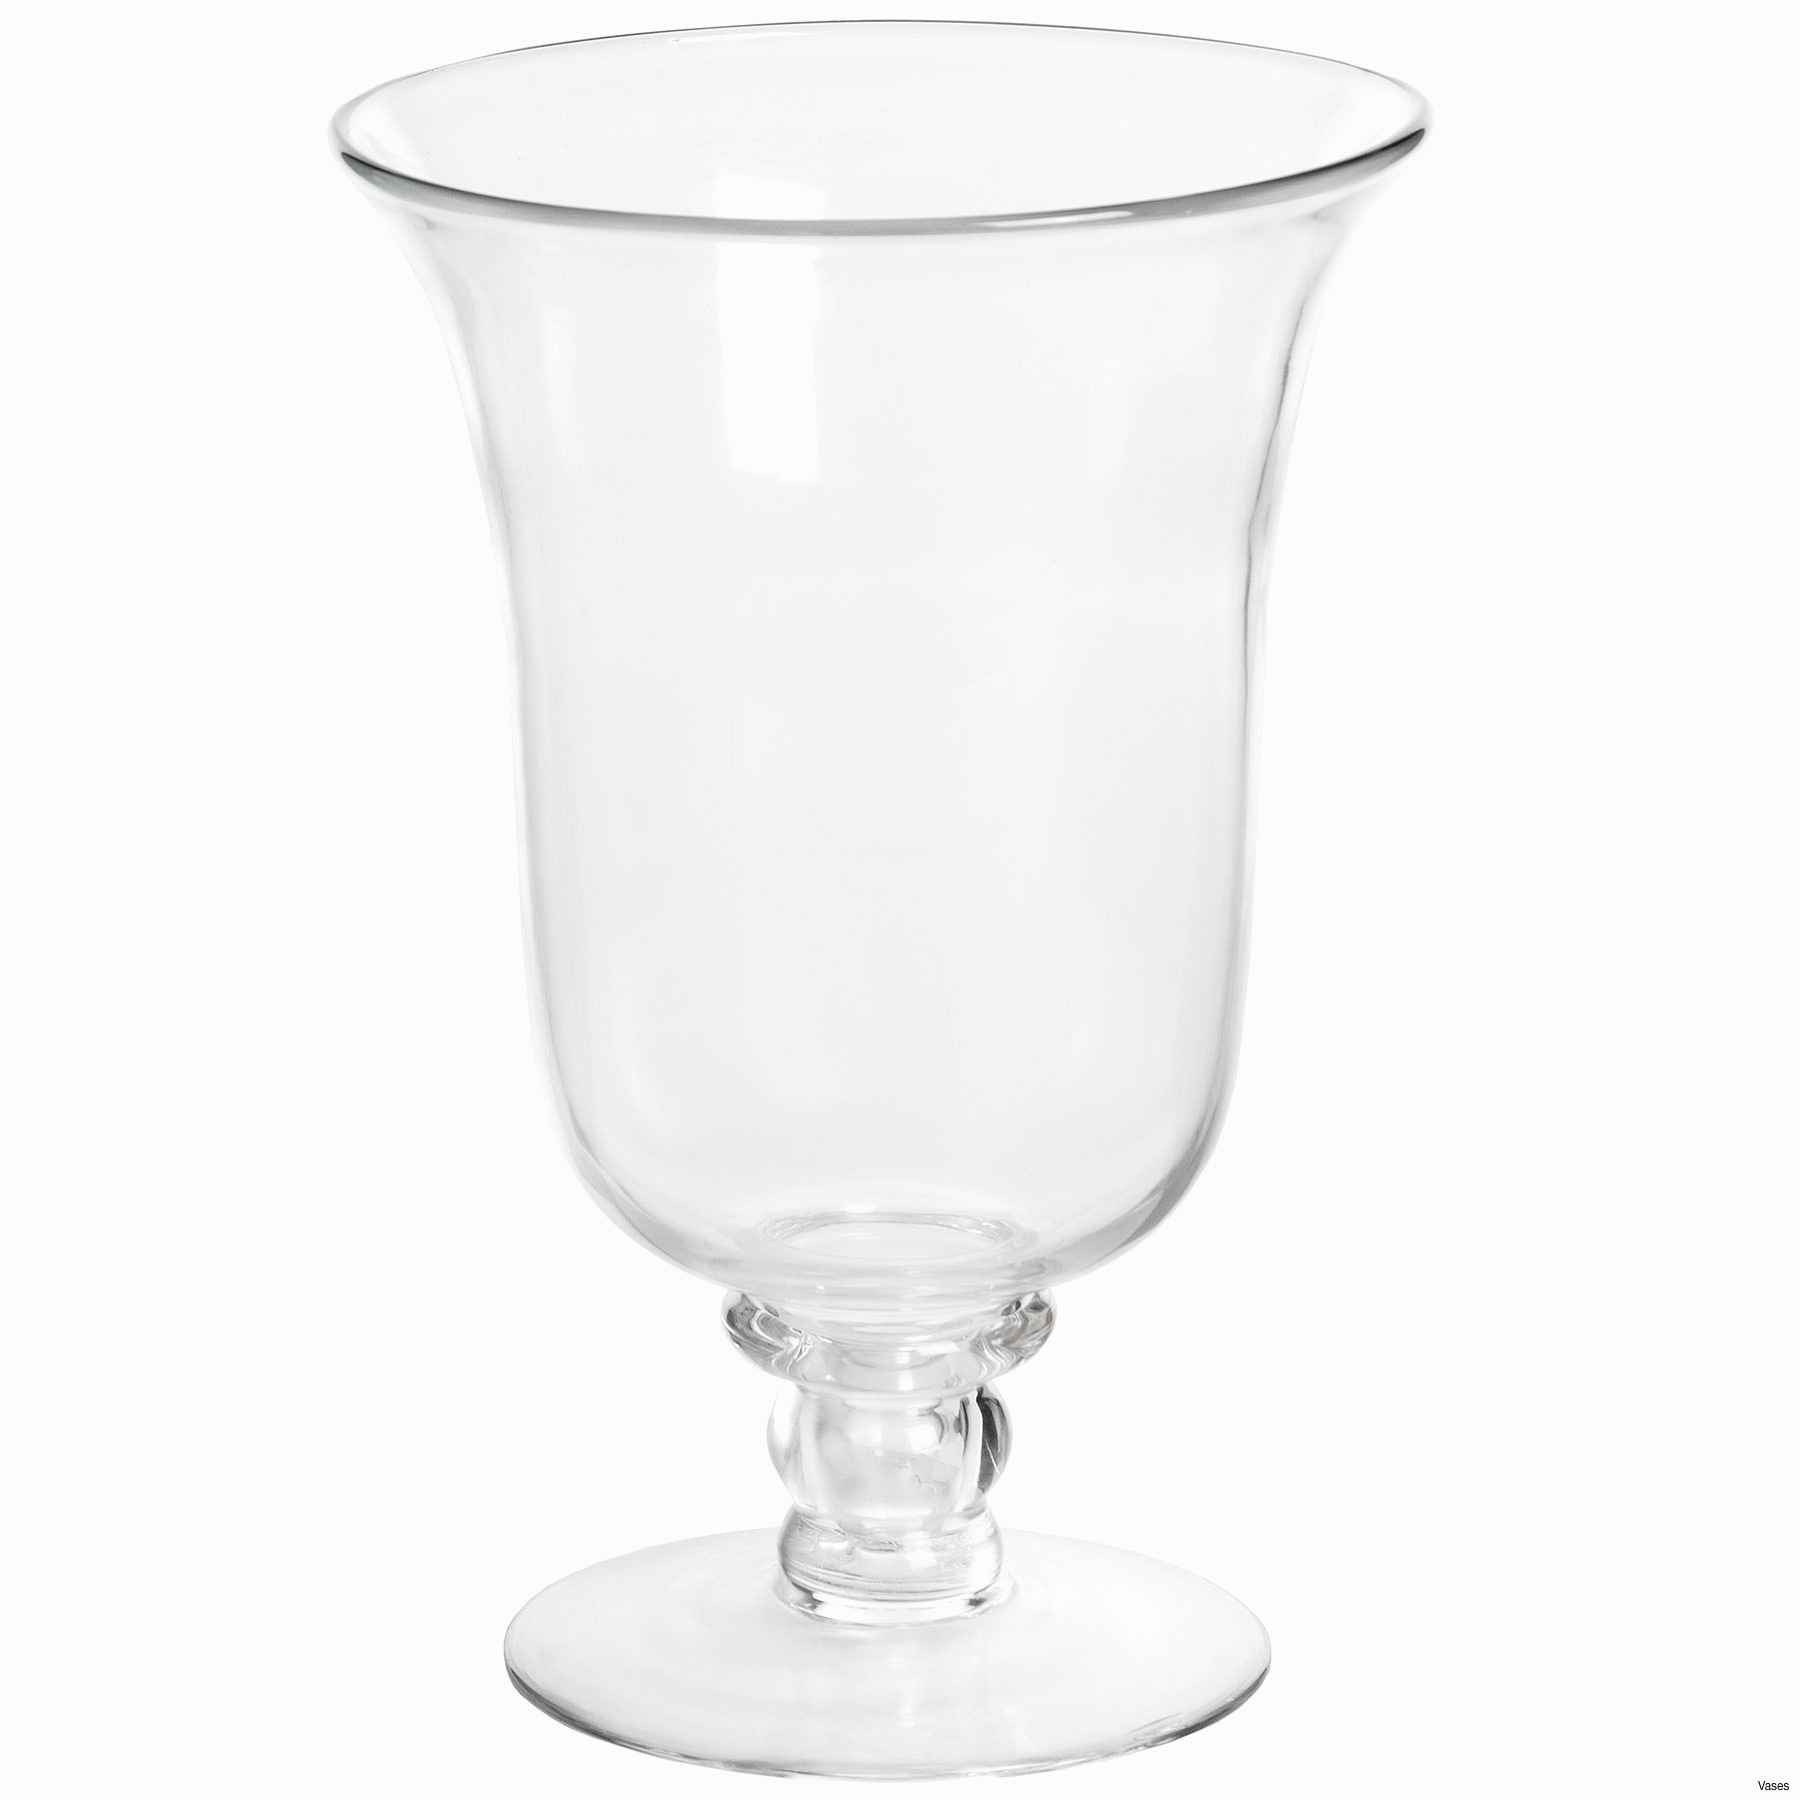 17 attractive Big Clear Glass Vase 2024 free download big clear glass vase of wholesale vases www topsimages com with candle stands wholesale lovely faux crystal candle holders alive vases gold tall jpgi cheap jpg 1800x1800